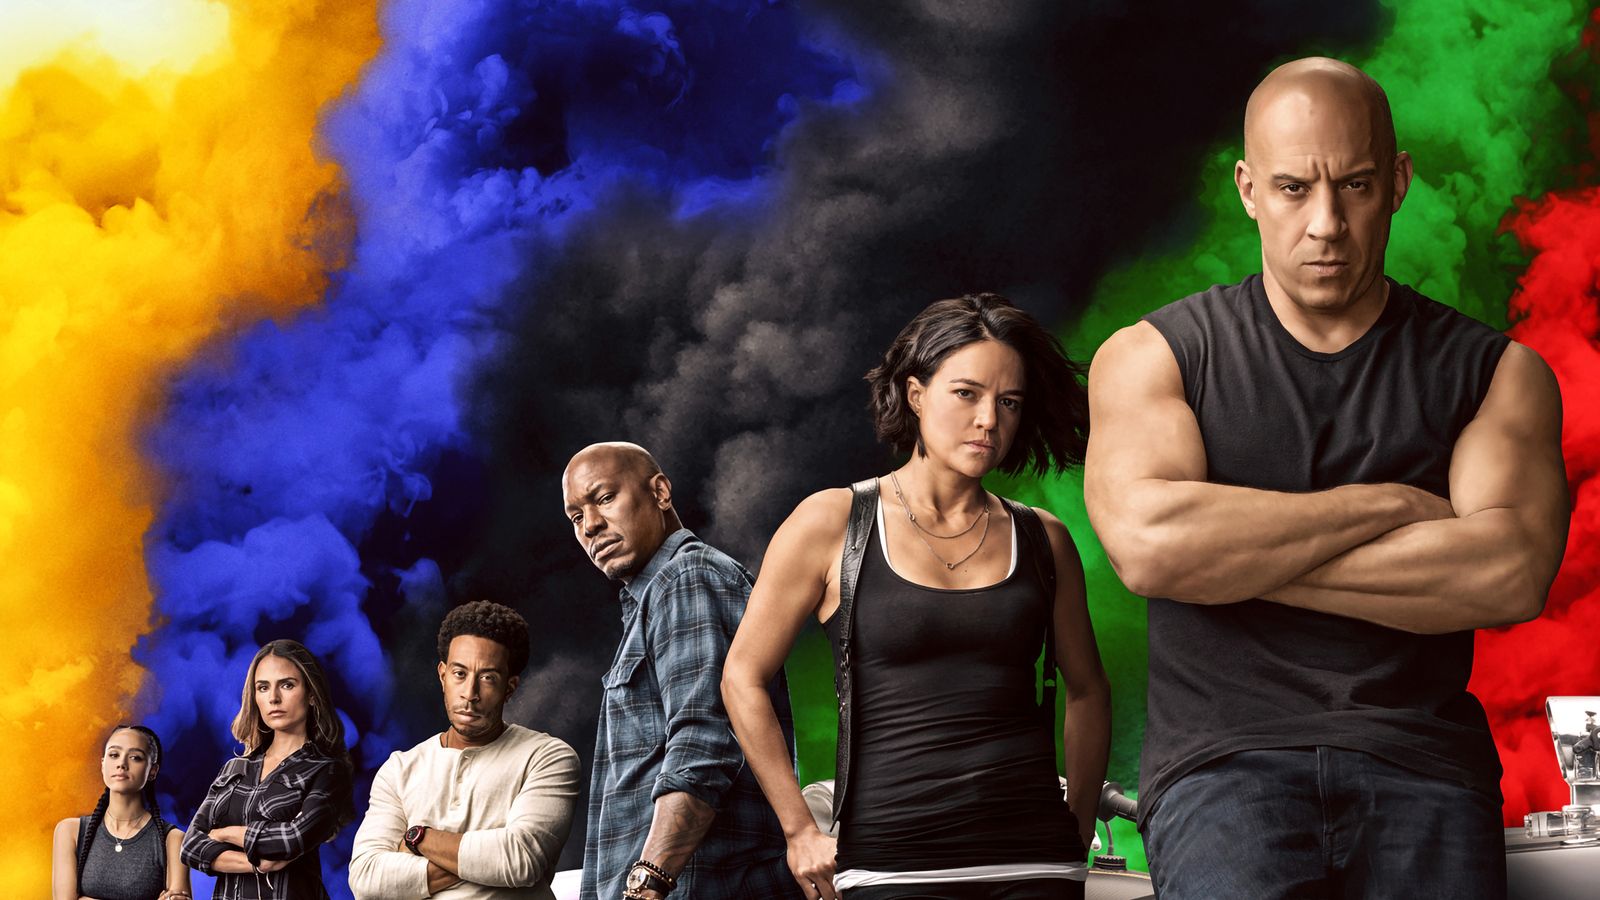 Fast And Furious 9 The Fast Saga 2020 Movie 1600x900 Resolution HD 4k Wallpaper, Image, Background, Photo and Picture